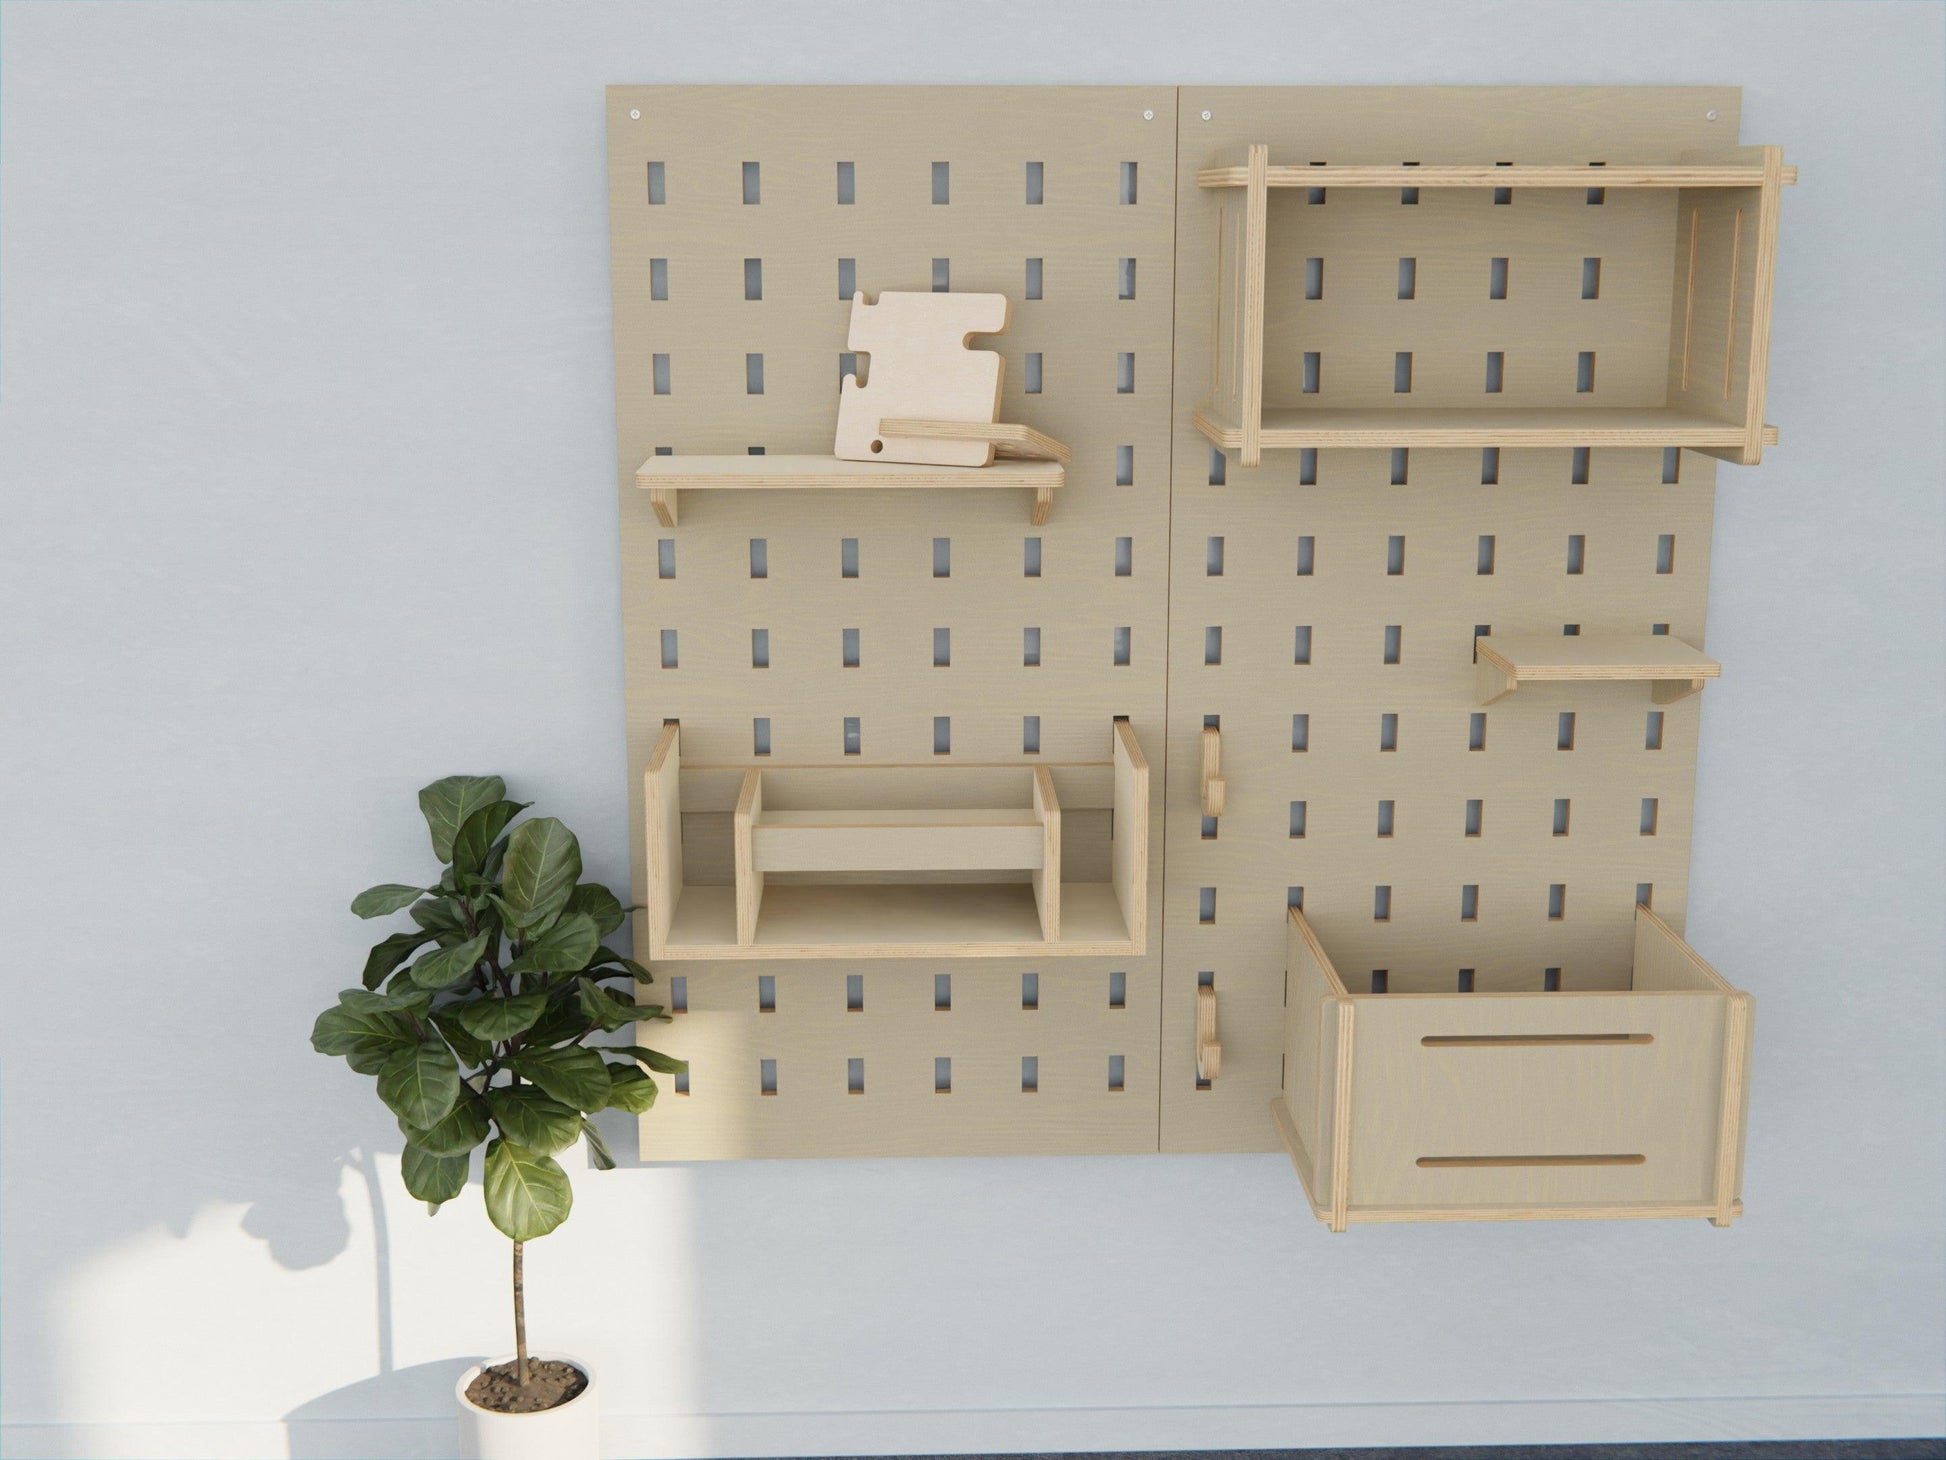 Experience the versatility of our storage-focused pegboard set. Move, adjust, and personalise as you wish!